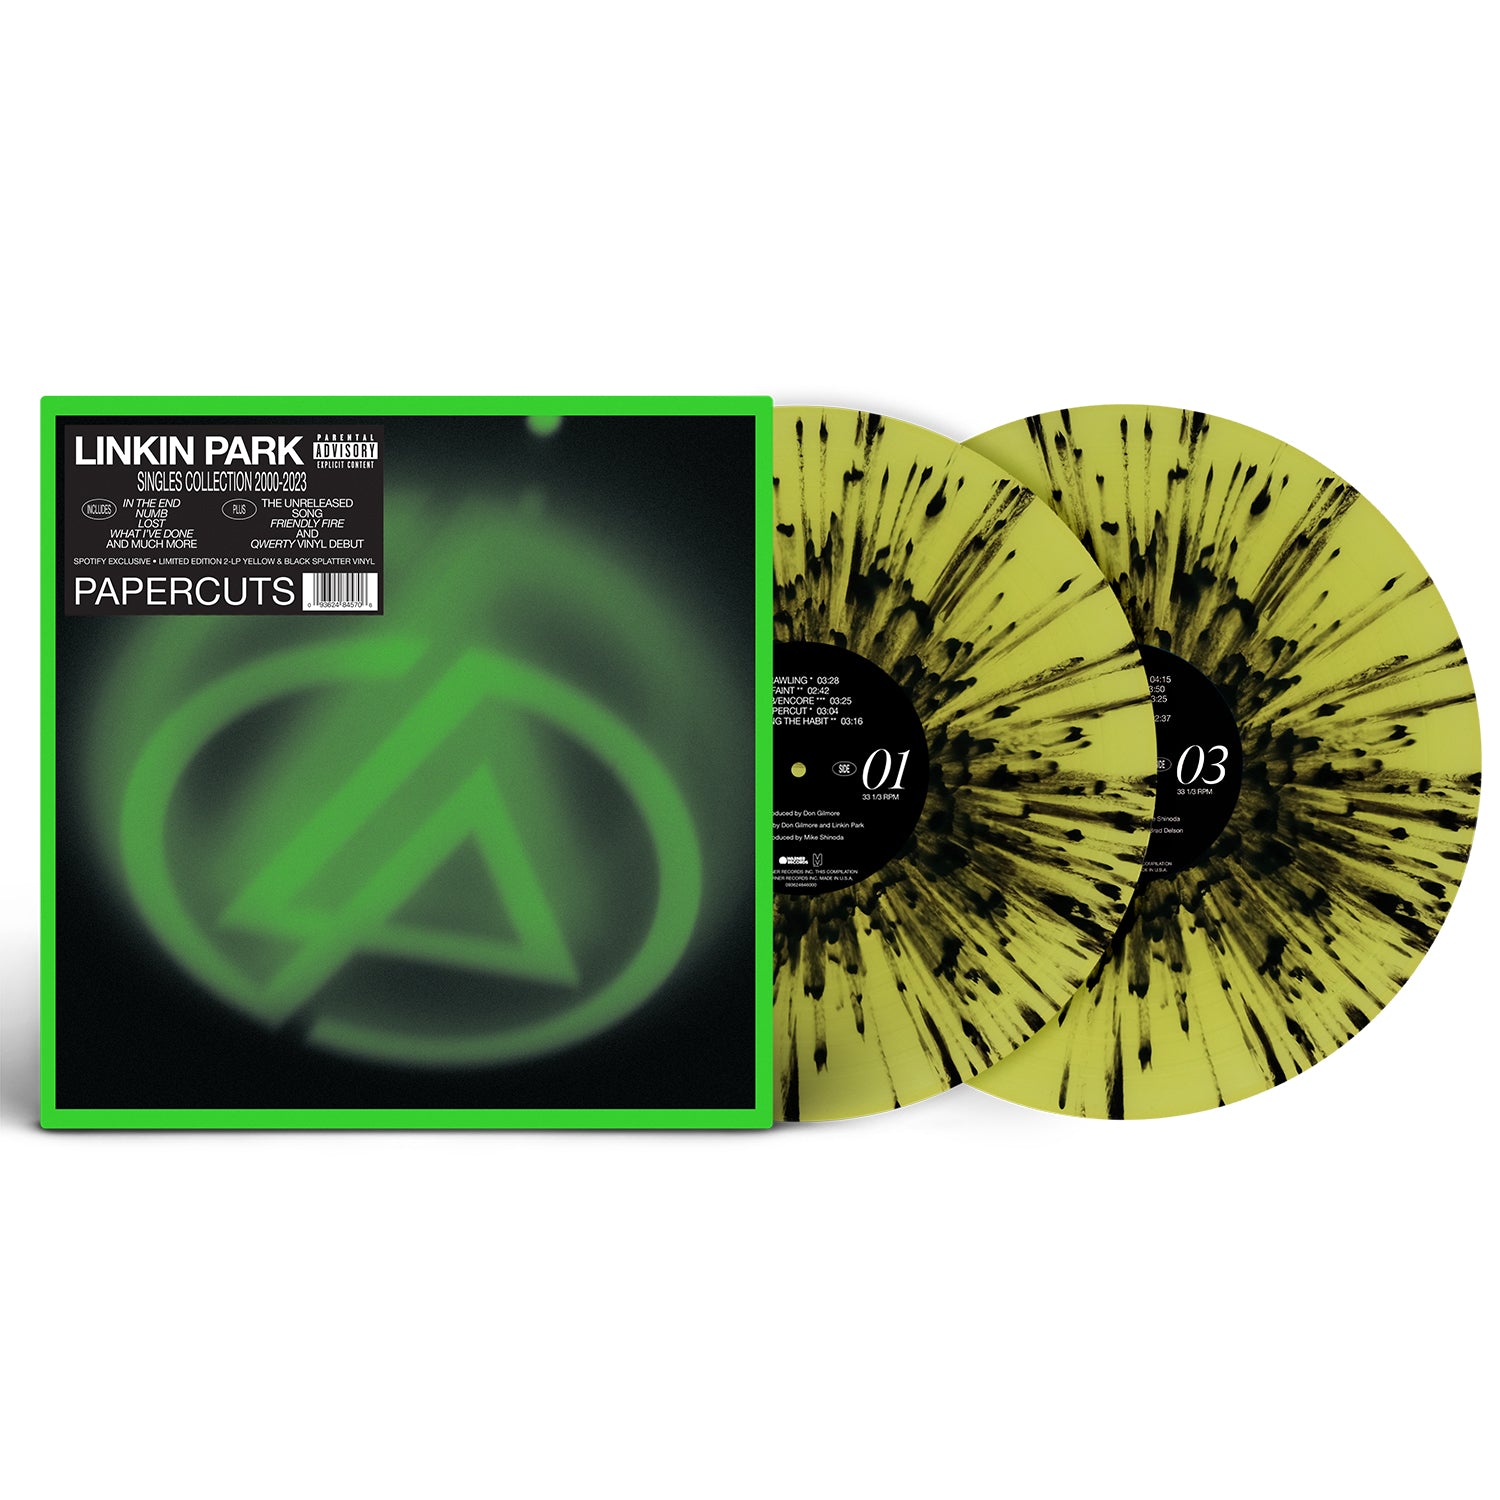 Papercuts Limited Edition Spotify Exclusive Yellow and Black Splatter Vinyl 2LP